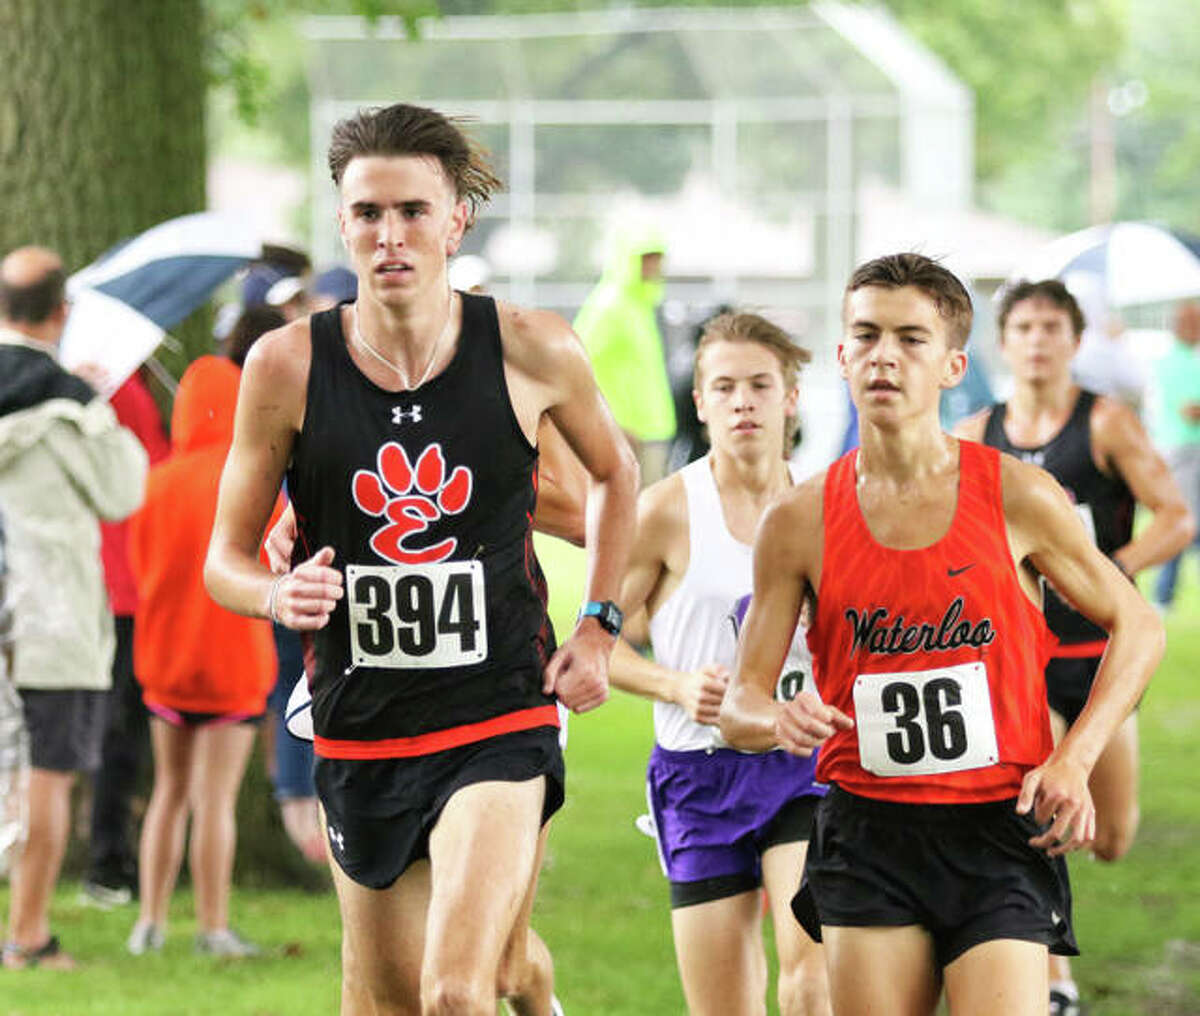 Edwardsville’s Ryan Watts (left) runs with Waterloo’s Joe Schwartz during the Granite City Invite on Sept. 4 in Granite City. On Saturday the Peoria Invite at Detweiller Park, Watts posted a PR to finish third in the Class 3A race. Schwartz ran seventh in the Class 1A/2A race.